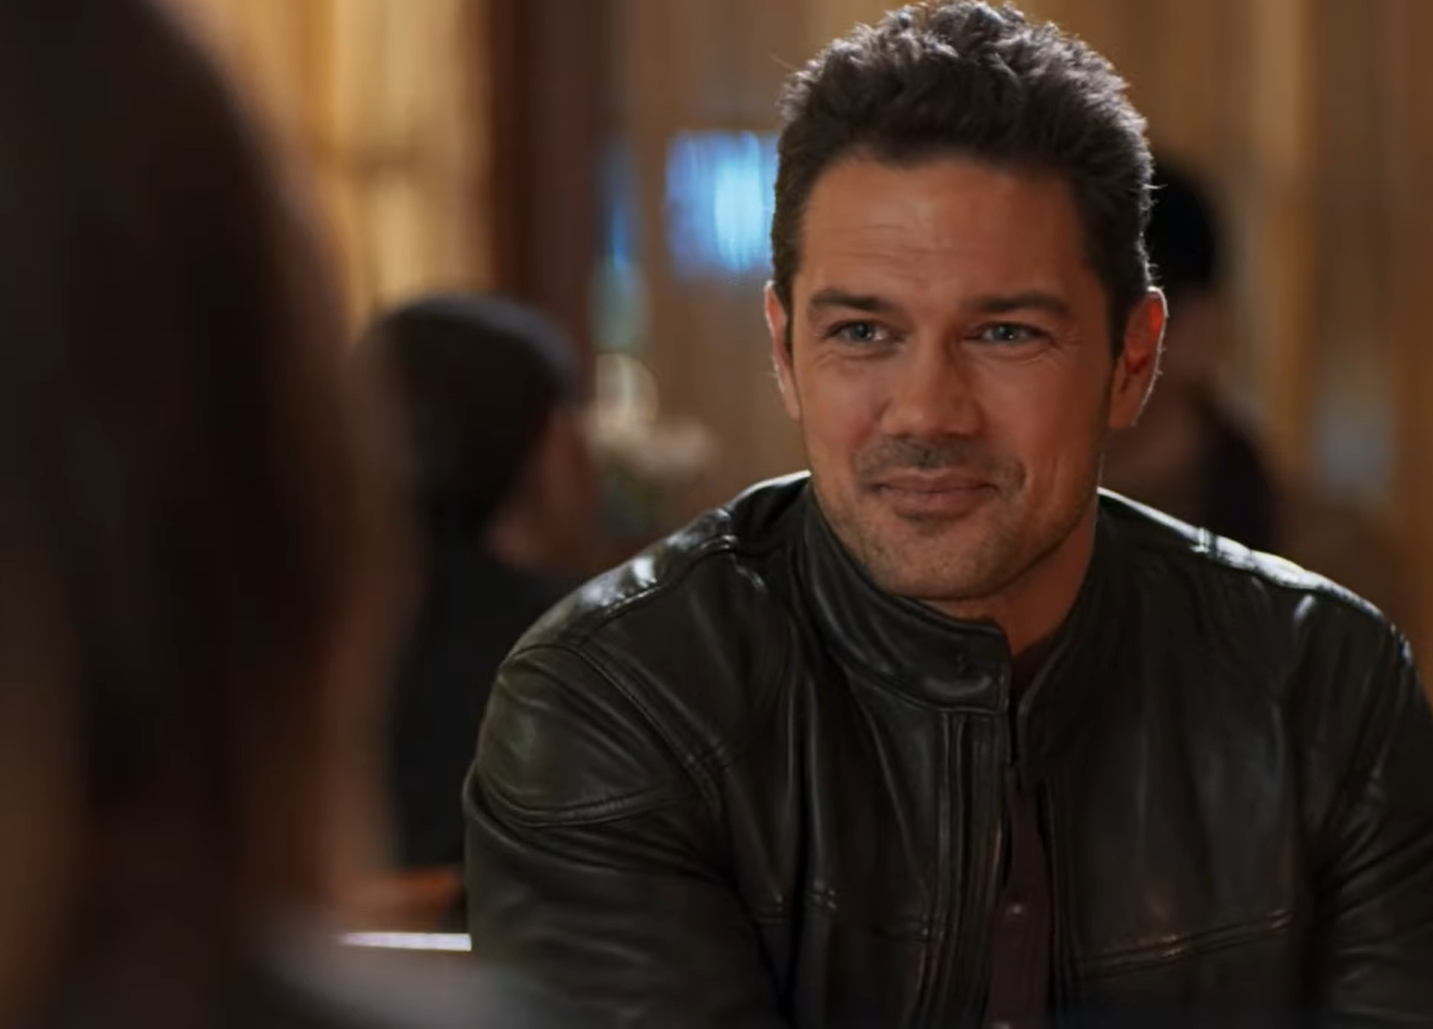 Ryan Paevey in leather jacket sitting in front of the woman and smiling